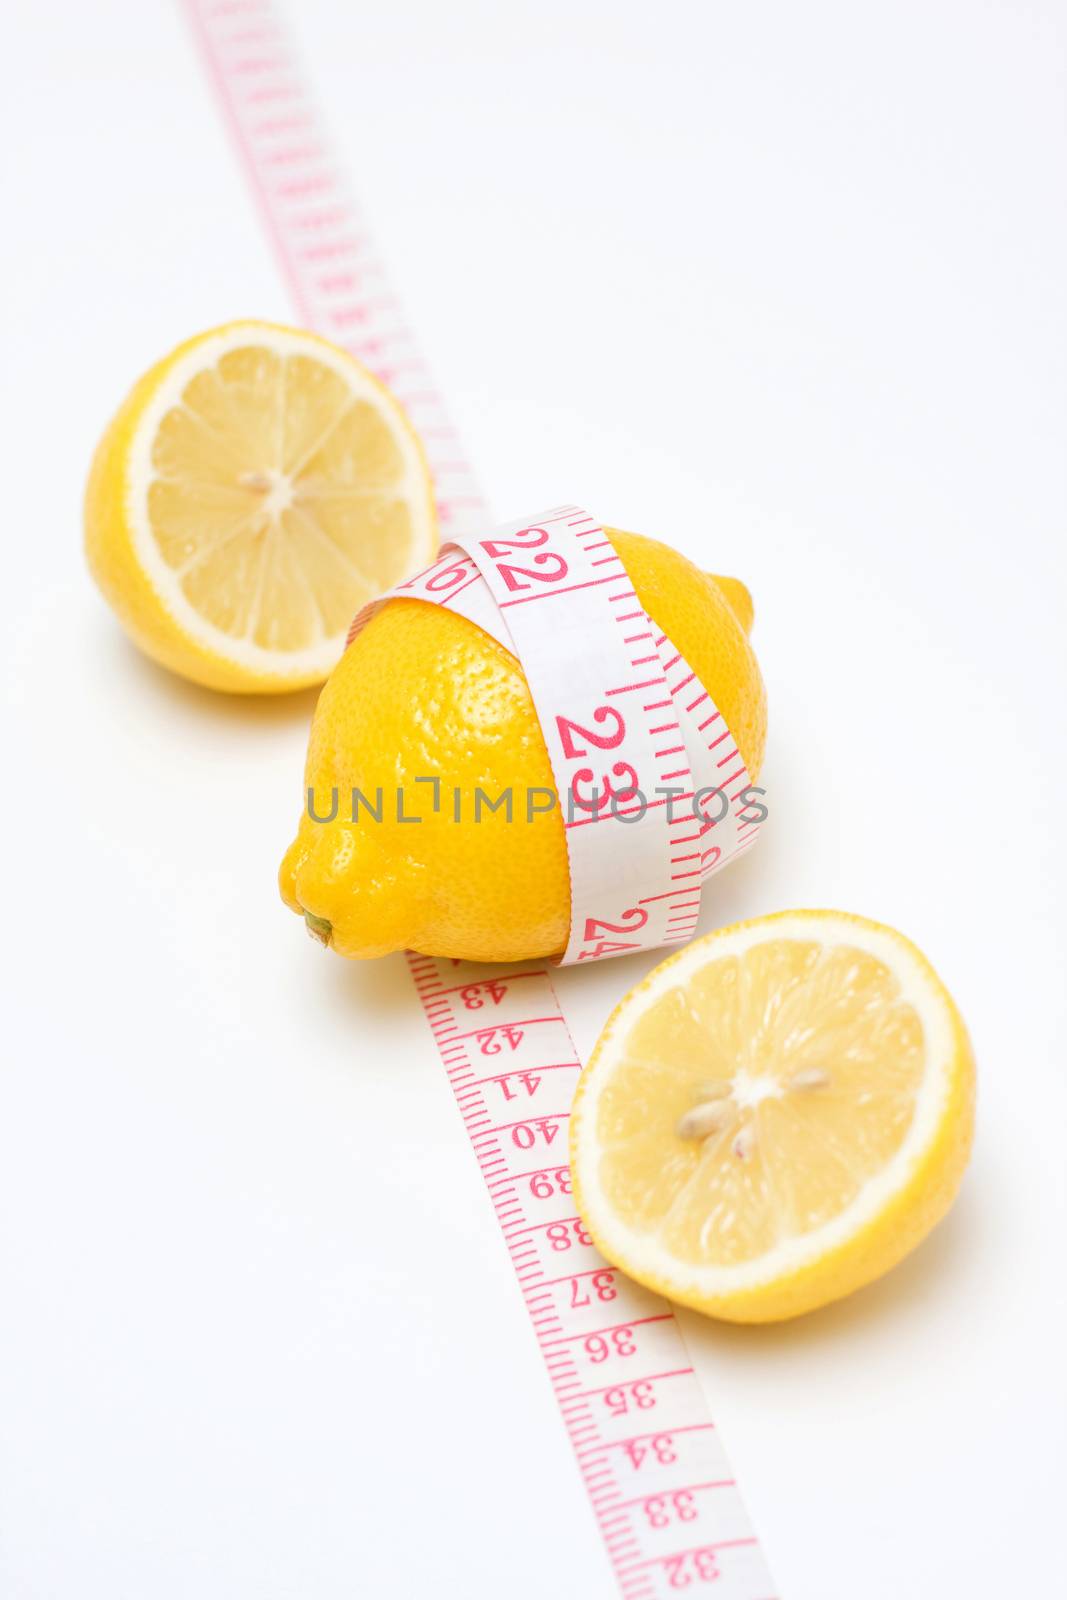 Lemon and Tape measures isolated on white background